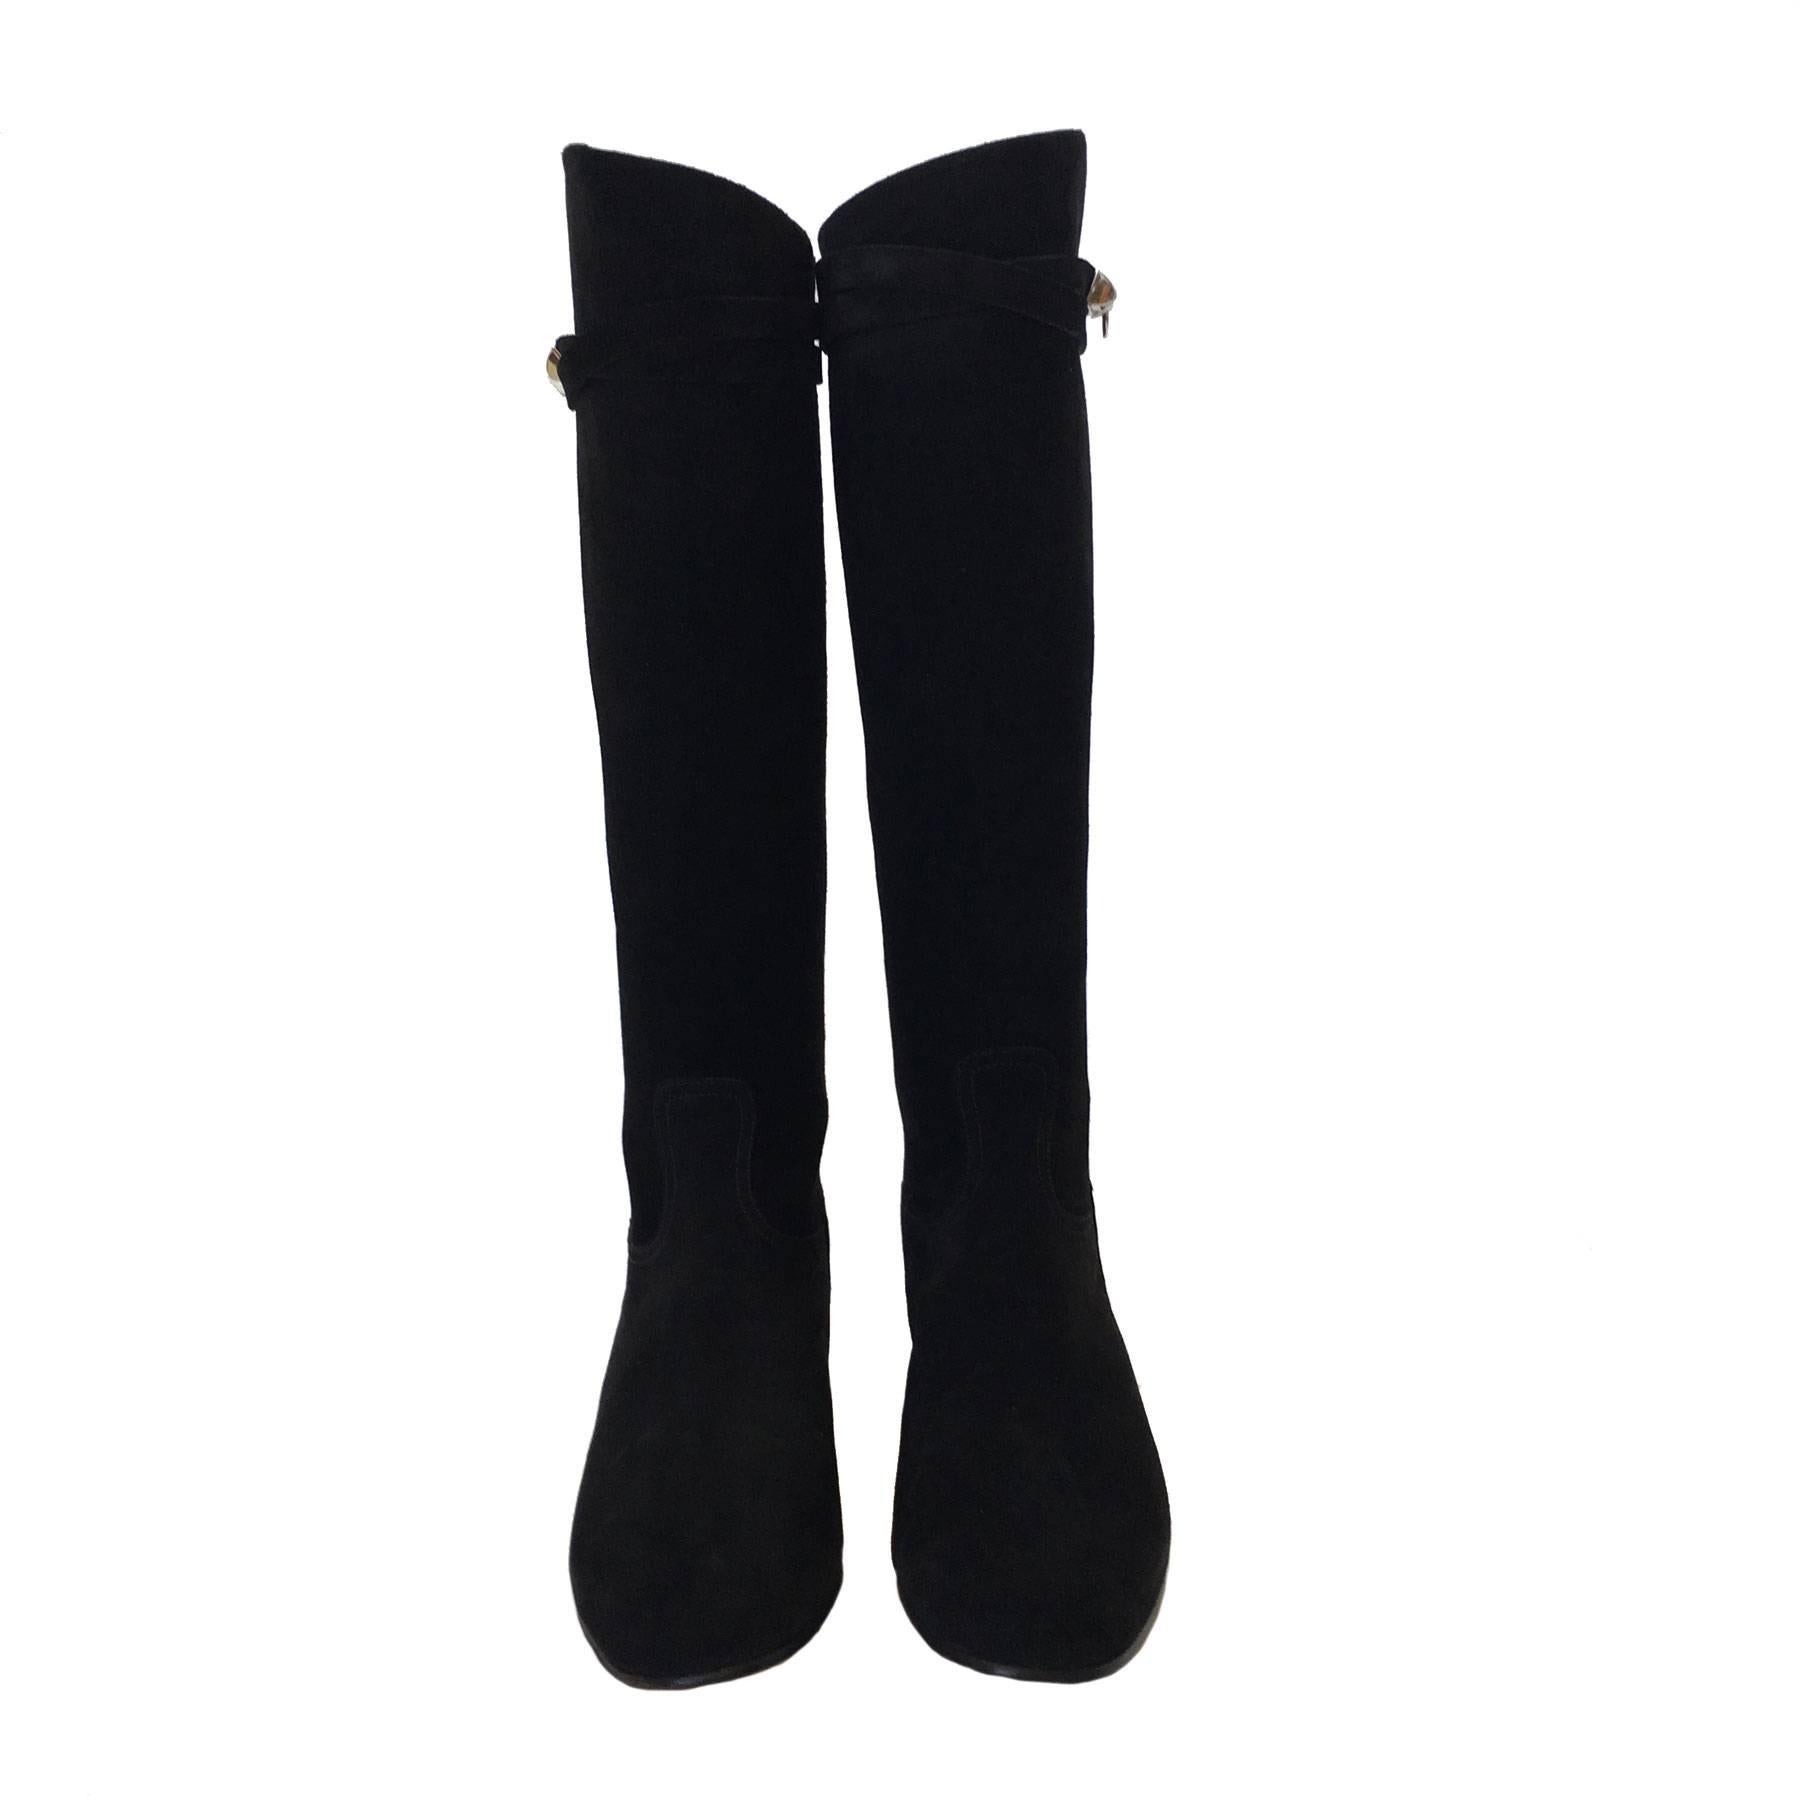 Women's HERMES Riding Boots in Black Suede Size 36.5EU